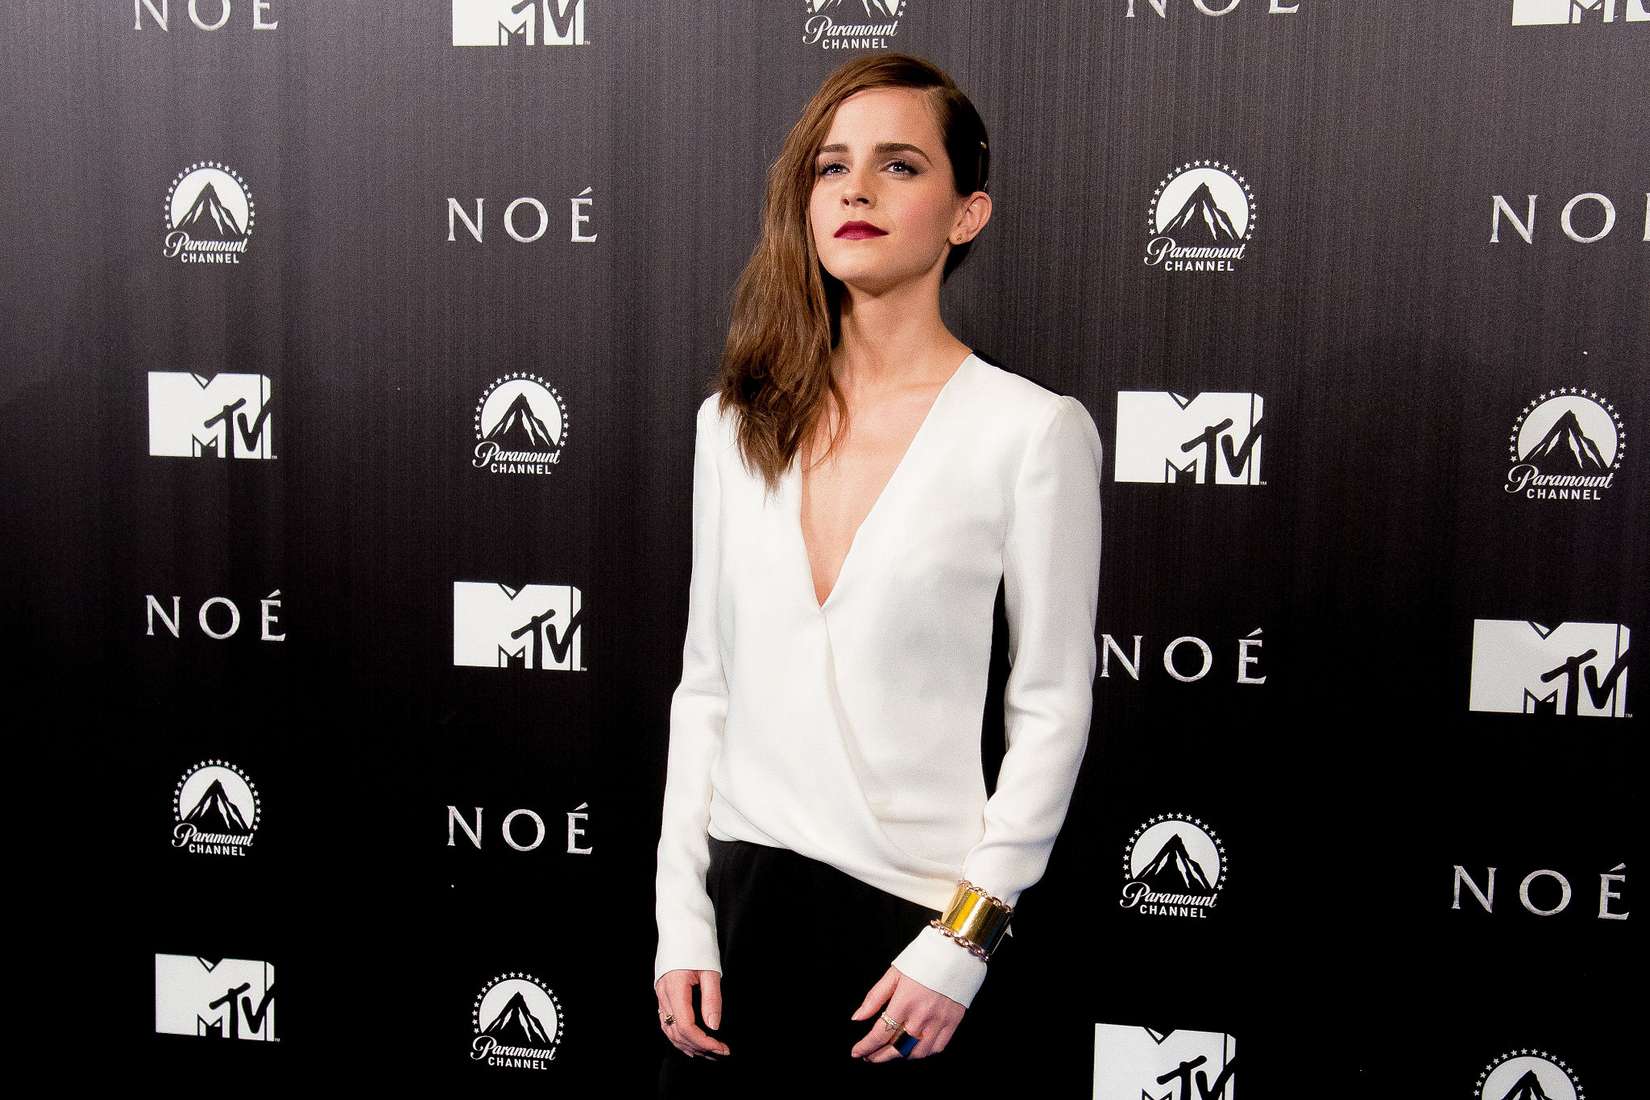 Emma Watson Turns Up the Heat in a V-neck Blouse at the "Noah" Premiere in Madrid